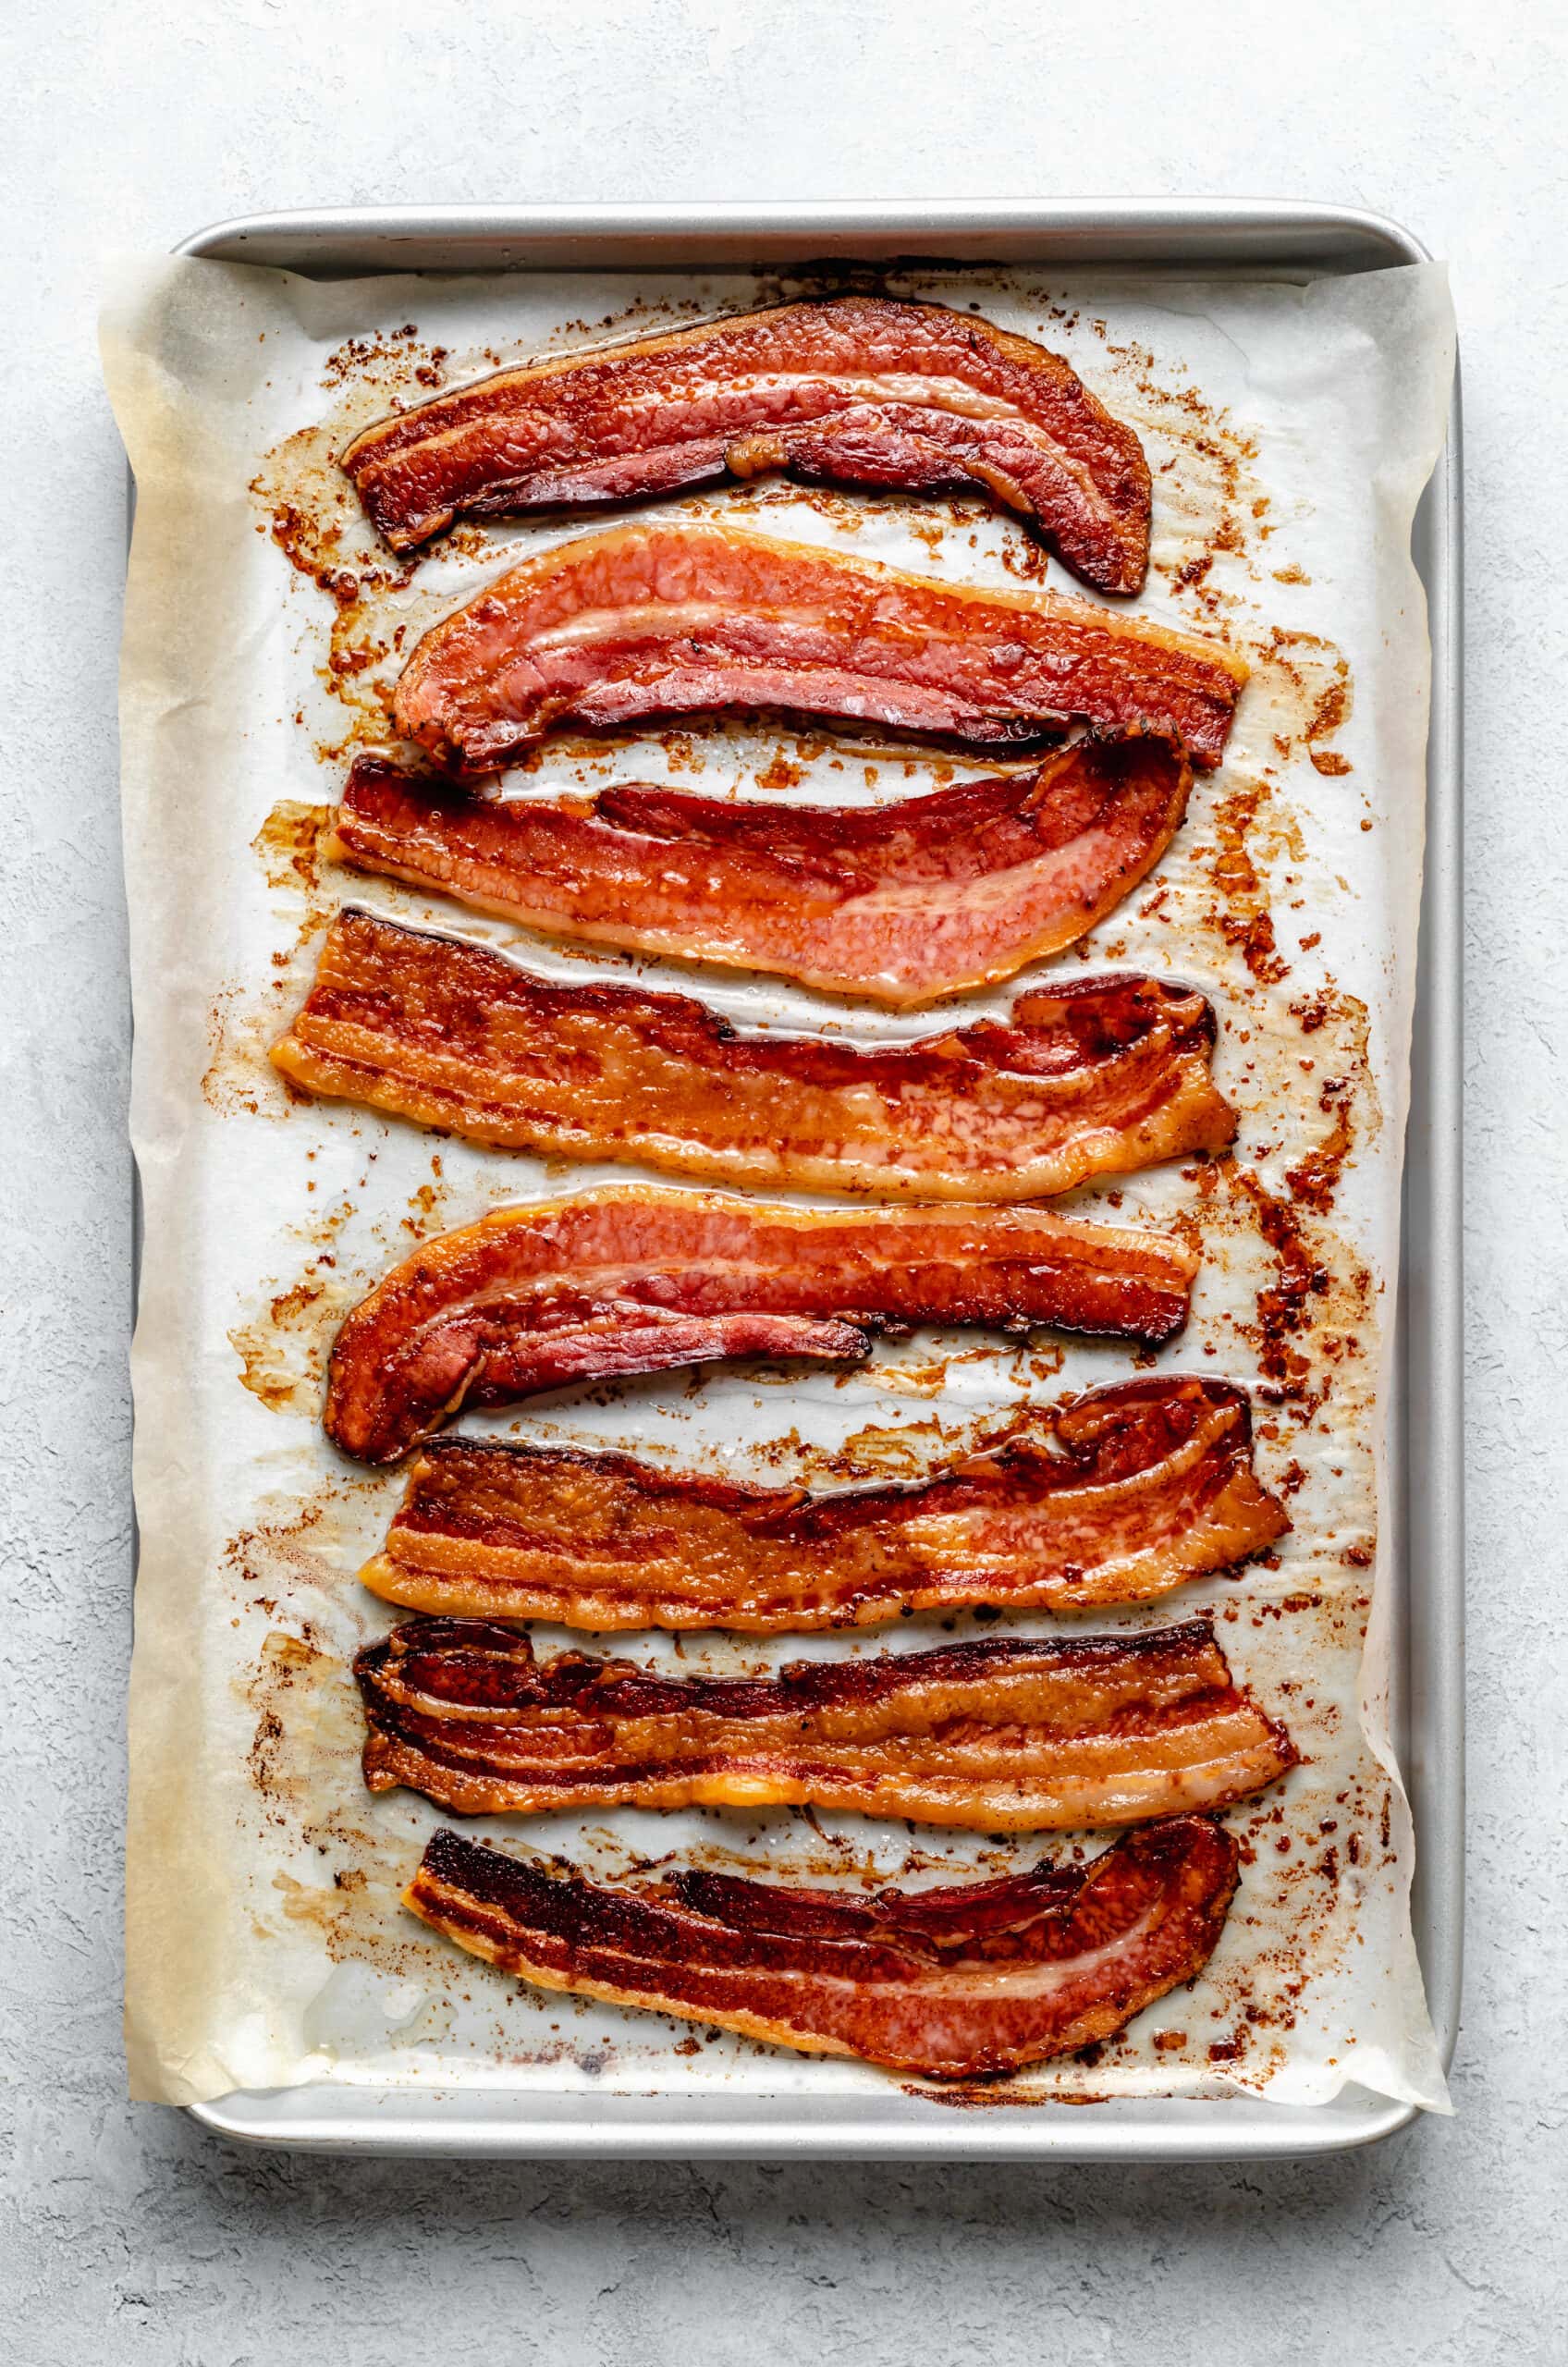 How to Cook Bacon in the Oven (Perfectly)